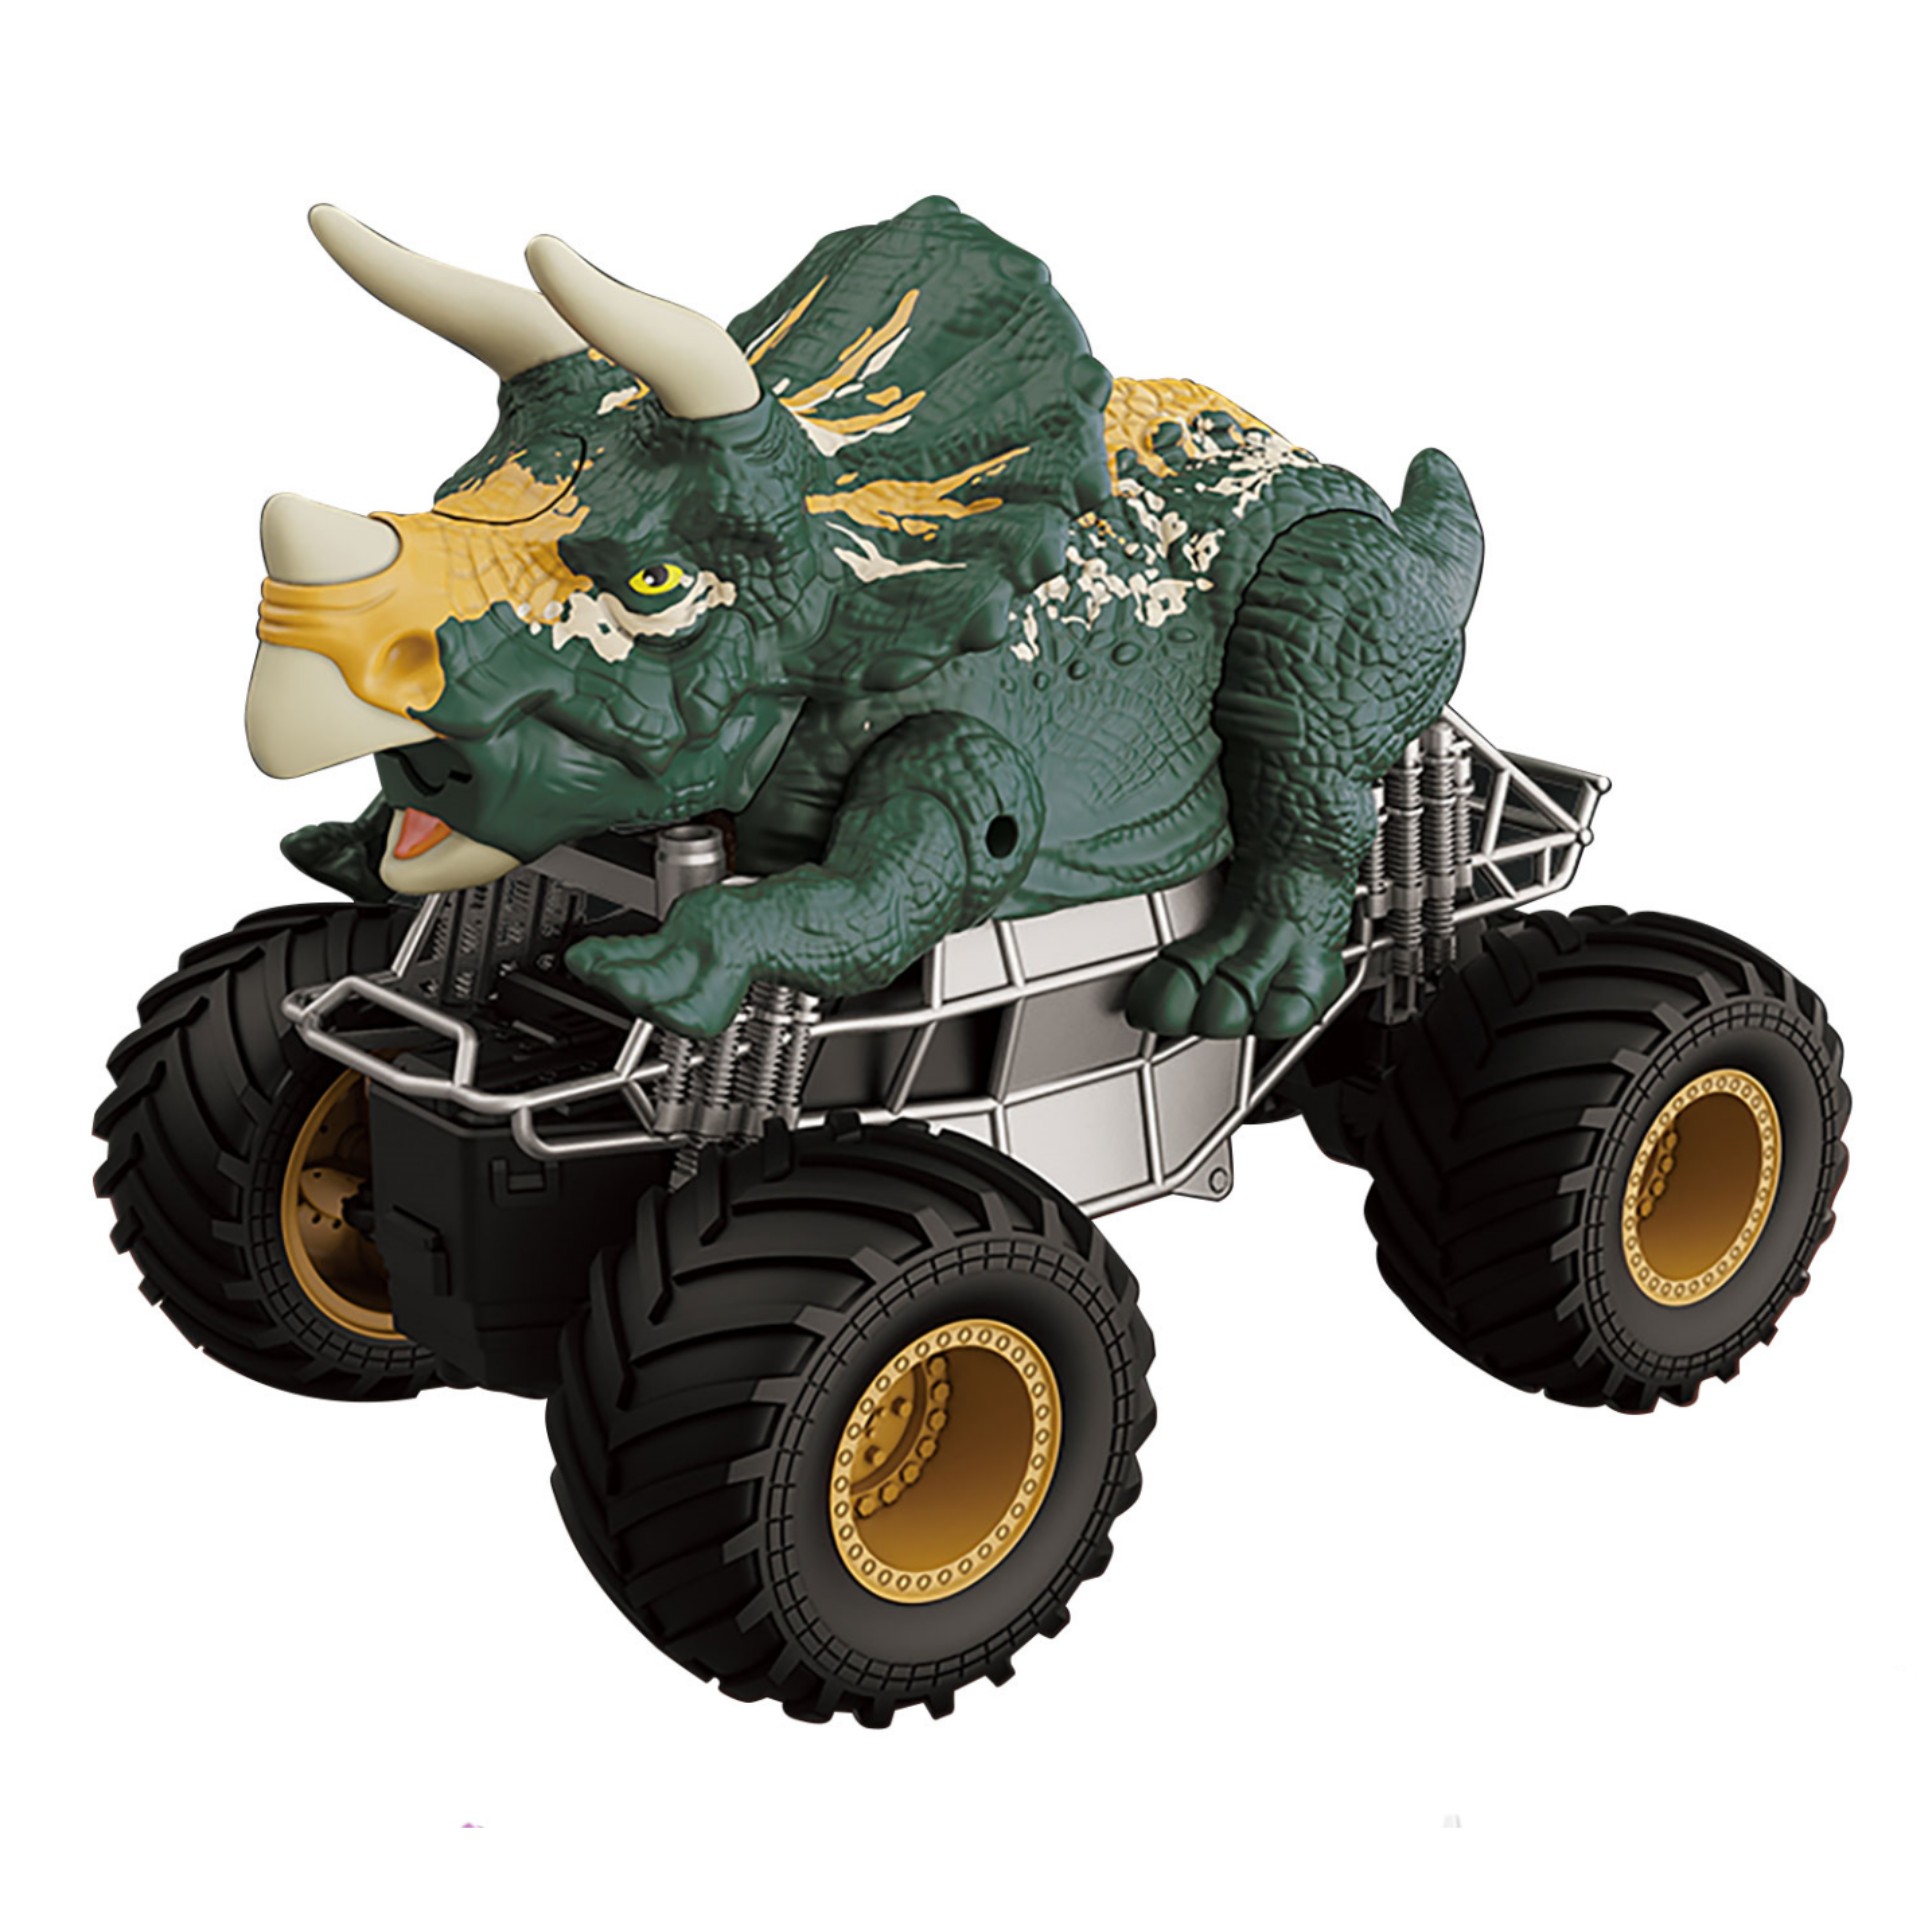 Q160 Kids Remote Control Dinosaur Car With Light Spray 2.4 GHz Rechargeable Rc Stunt Off-road Vehicle Toys For Kids Birthday Gifts